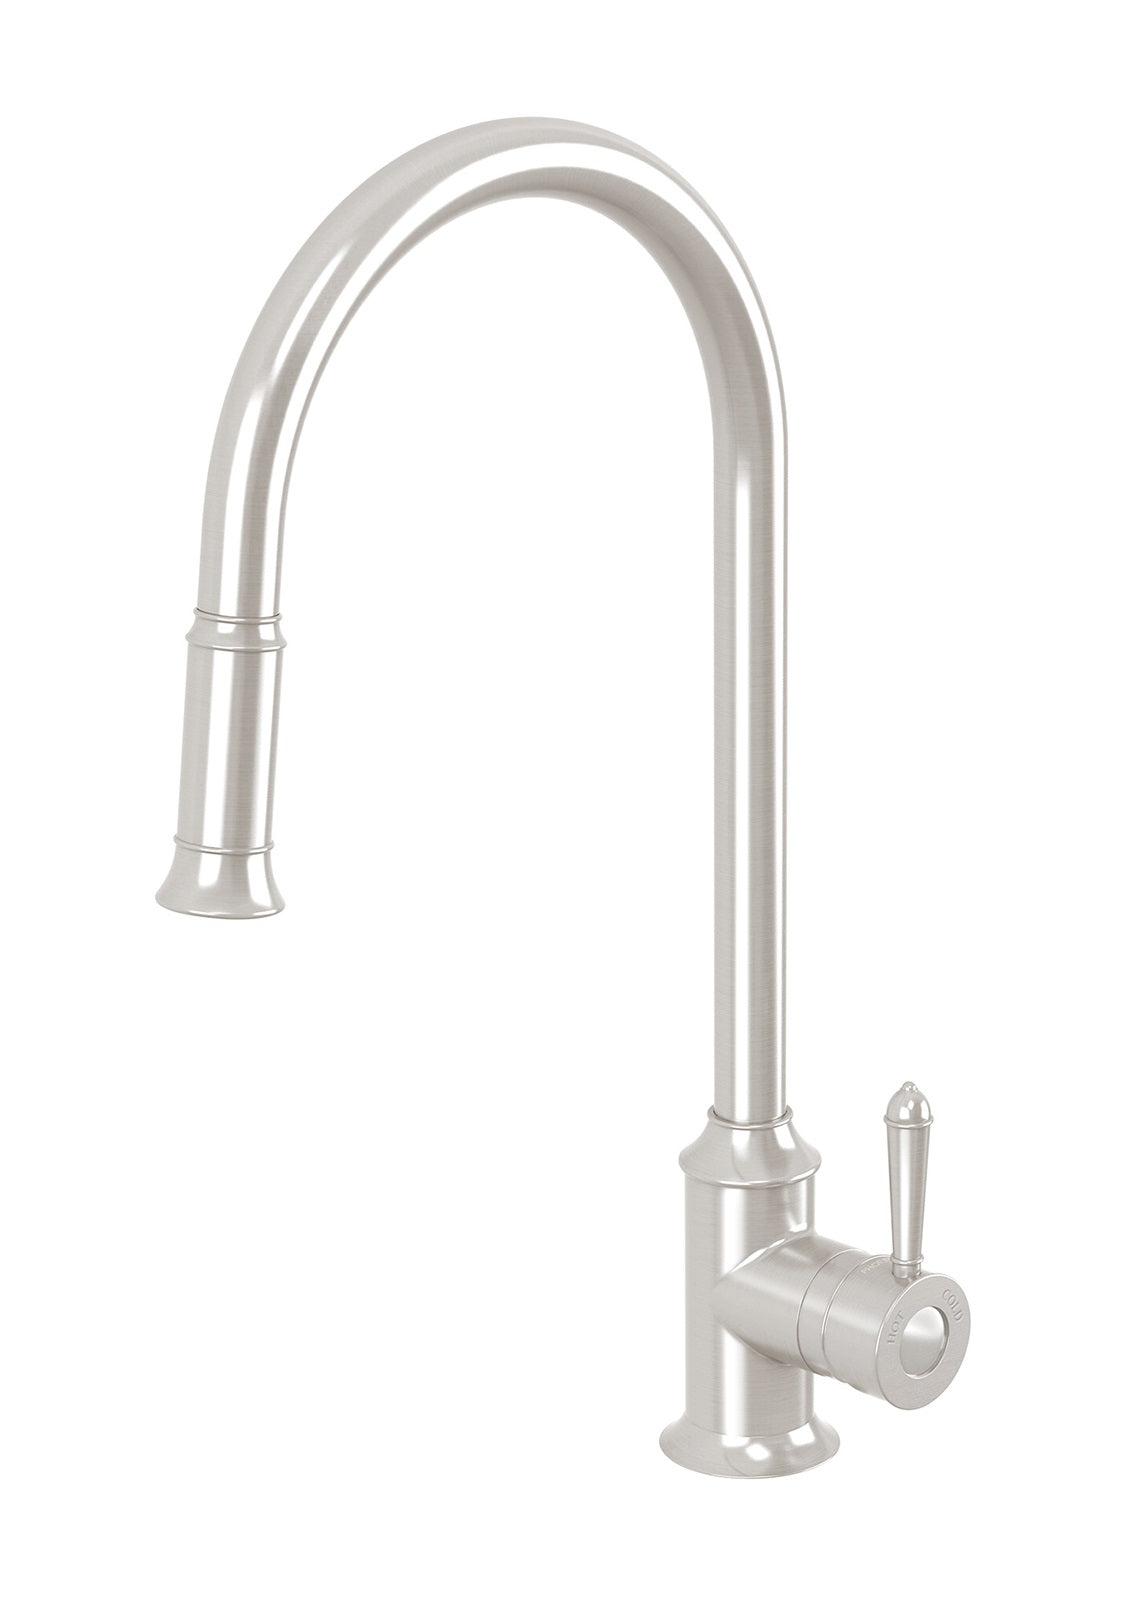 PHOENIX NOSTALGIA PULL OUT SINK MIXER BRUSHED NICKEL